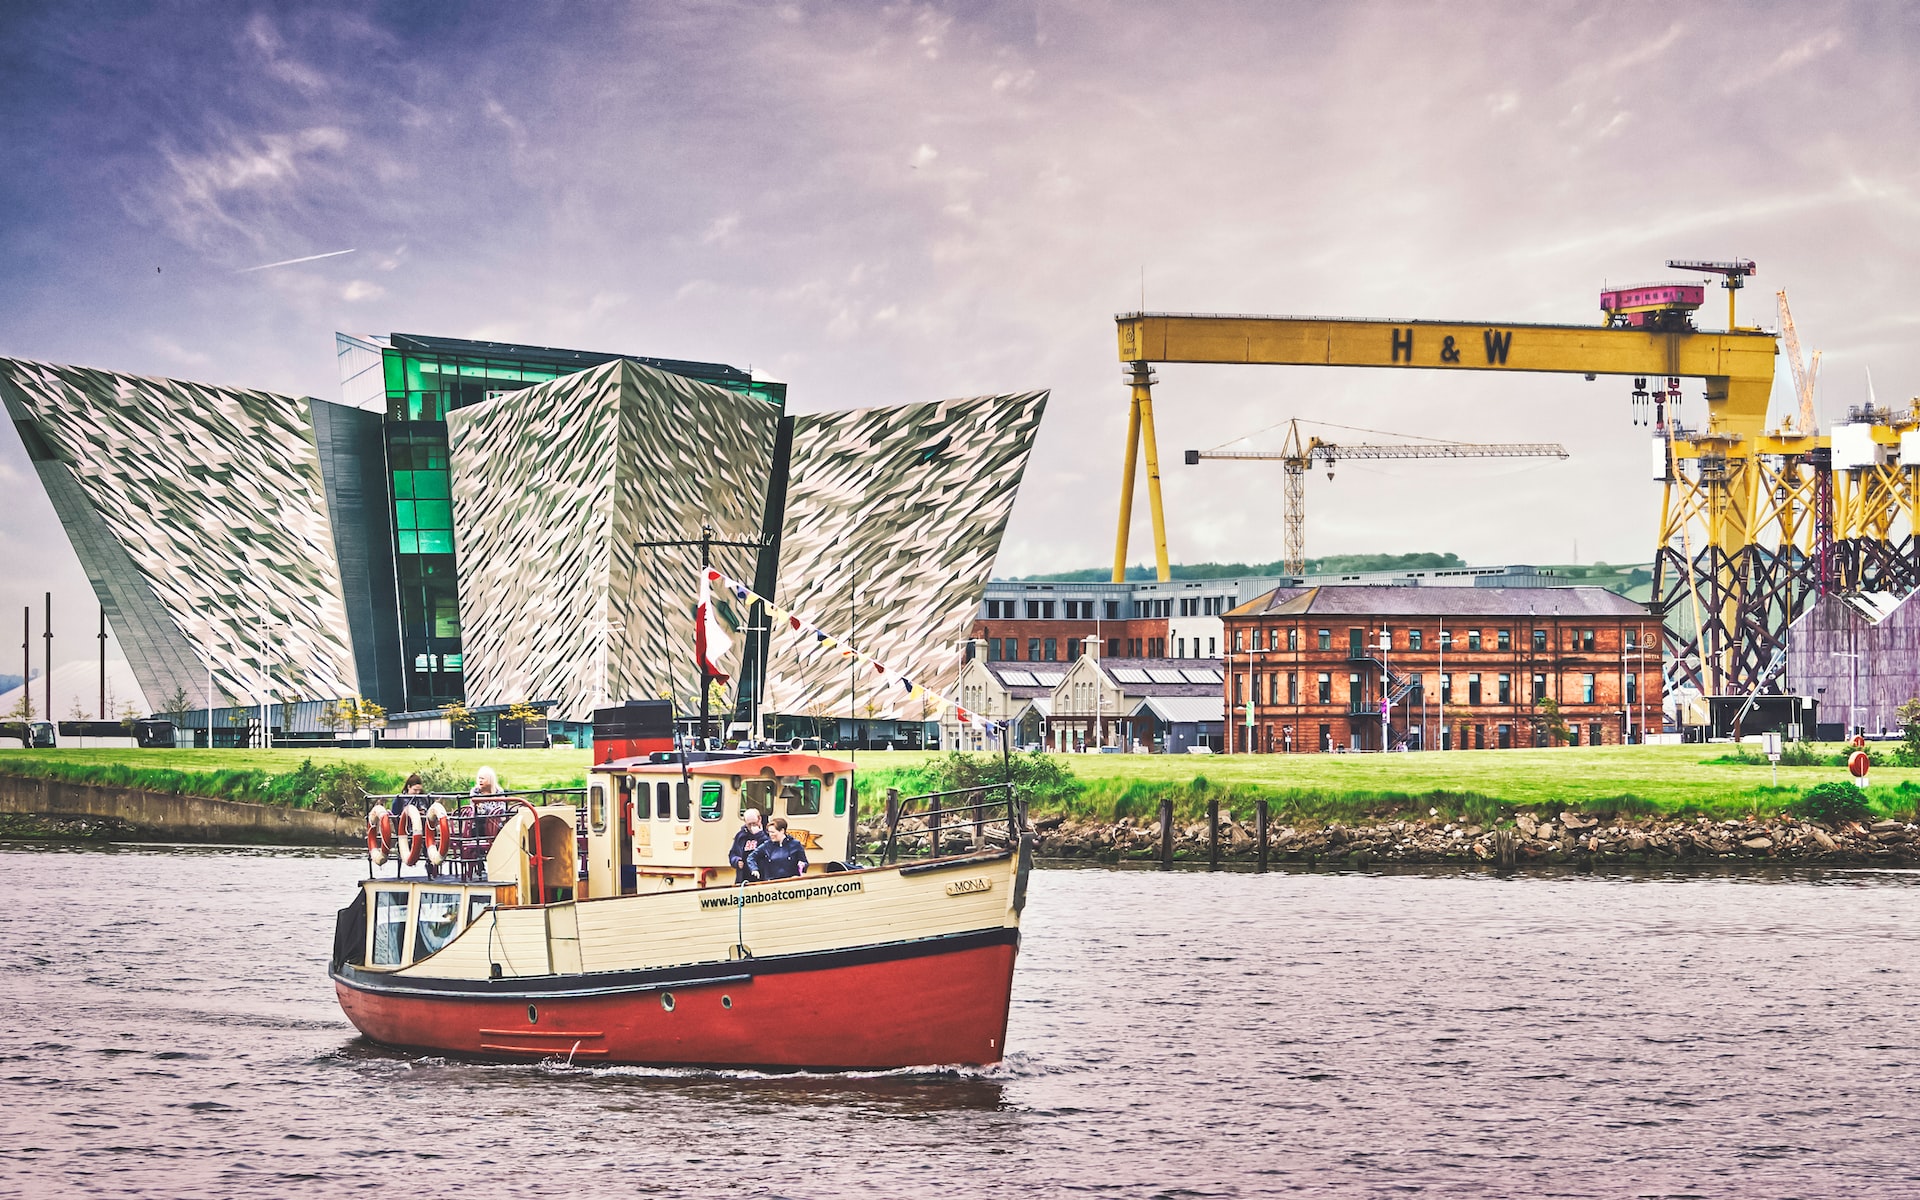 Three Belfast landmarks in one shot. From left to right: Titanic Belfast, a museum for all things Titanic related; the very large Harland and Wolffe ship building crane Goliath; and immediately below it, the red bricked building where the Titanic was designed by Harland and Wolff.